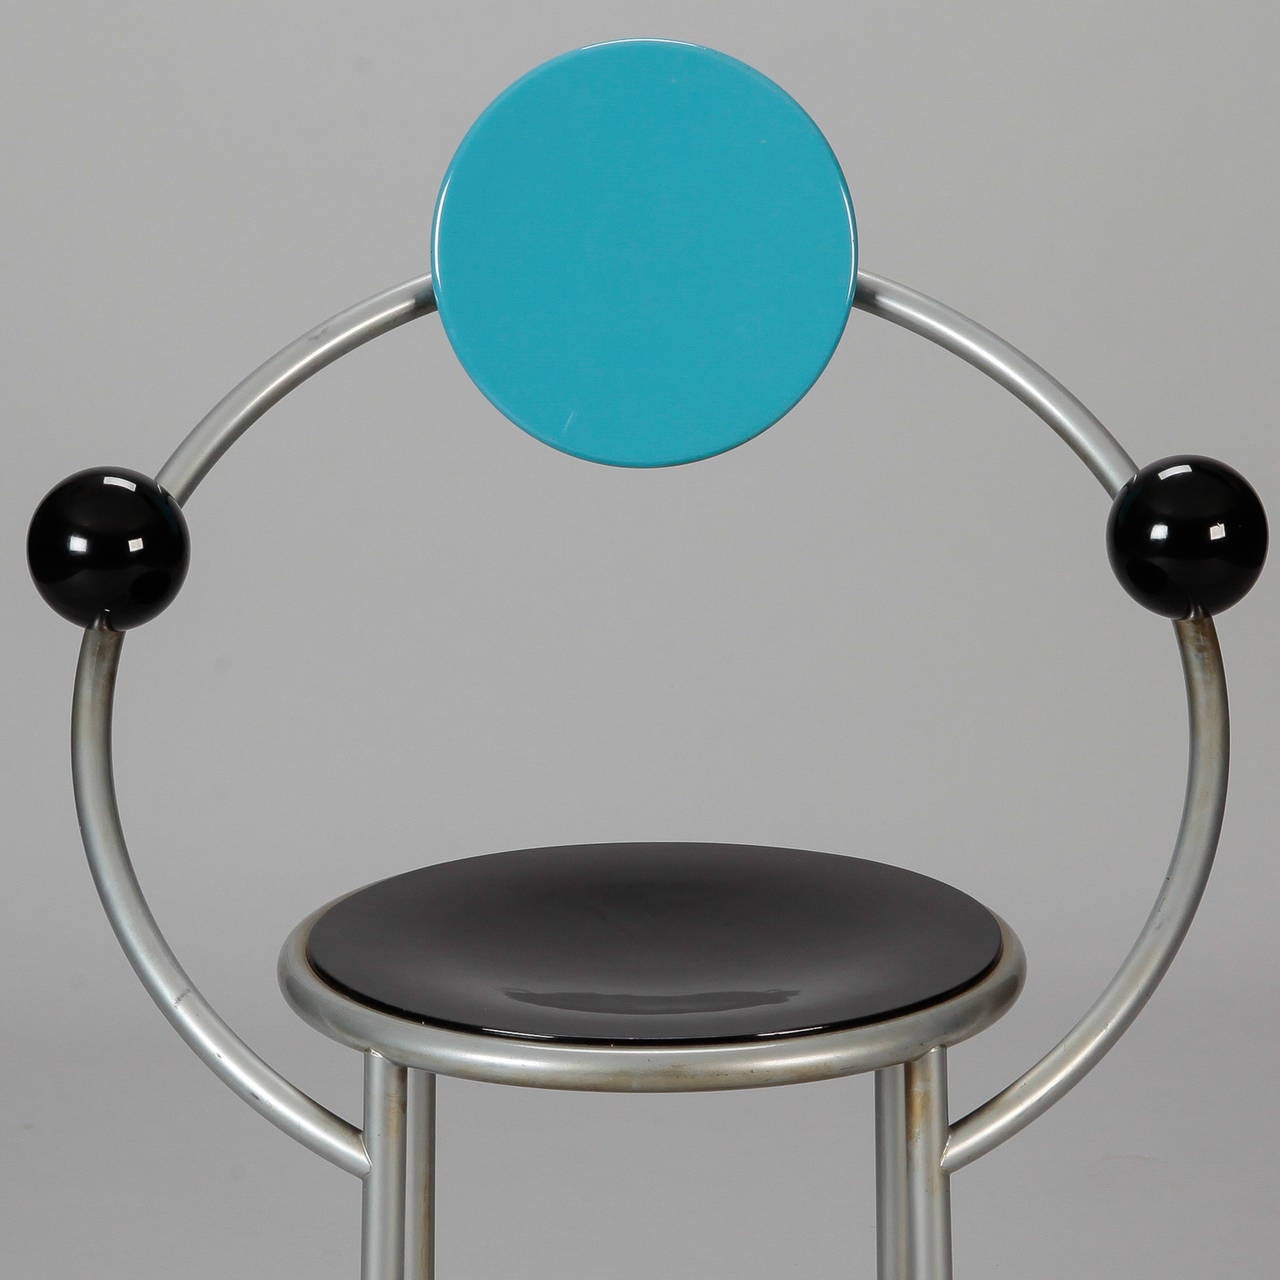 Iconic First Chair designed by Michele de Lucchi for Memphis Milano in 1982. Founded by Ettore Sottsass and other architects and designers in Milan, the whimsical furniture and decorative items produced by this design firm in the 1980s is now sought